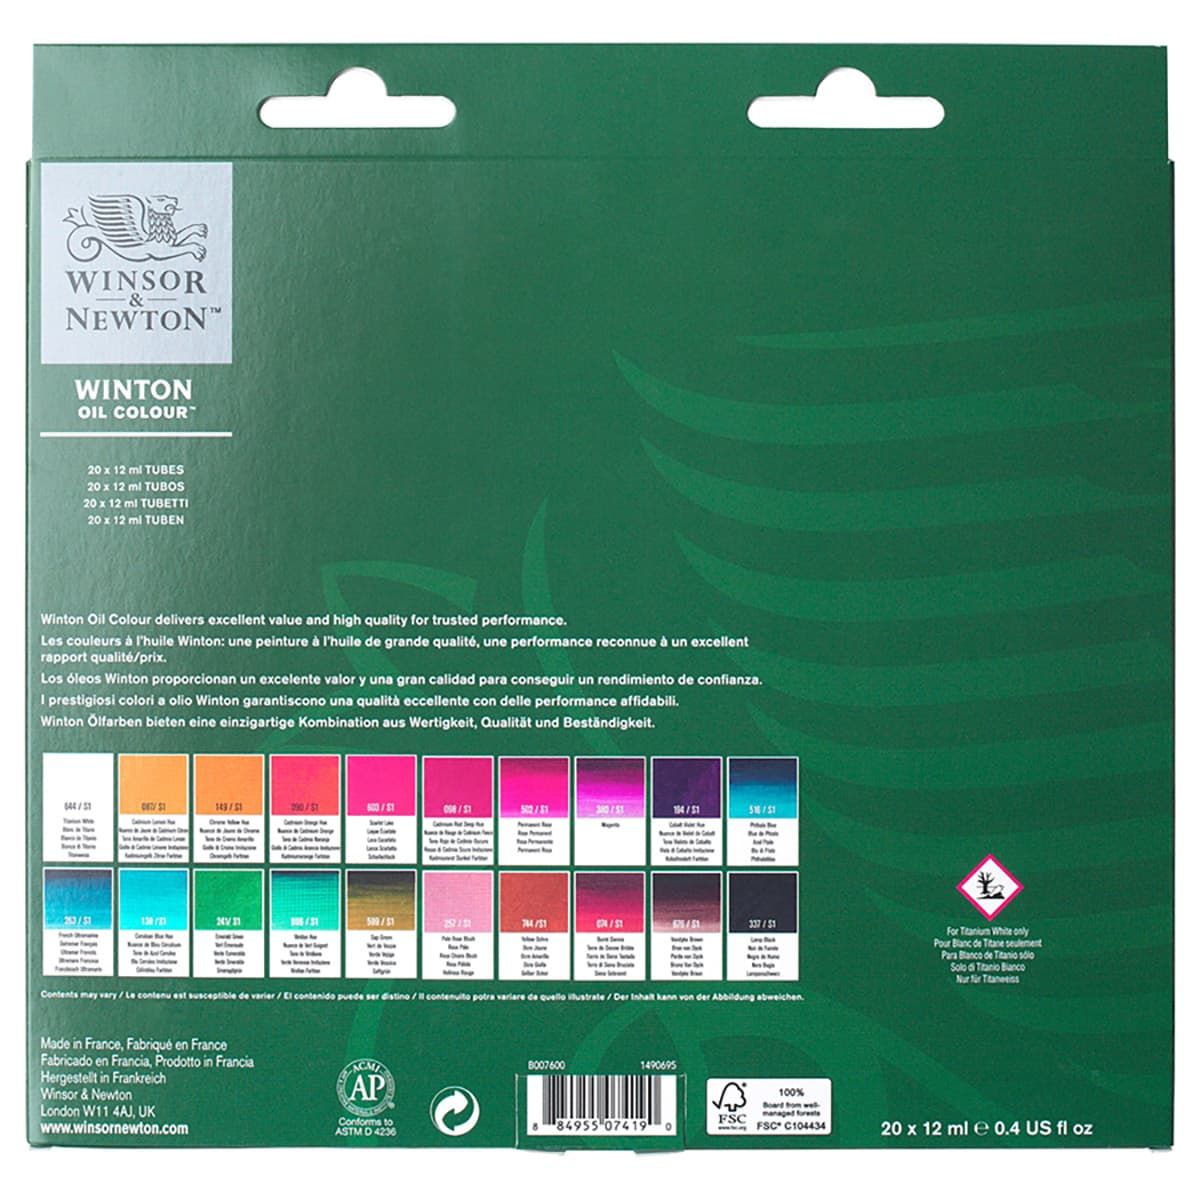 Winsor & Newton Winton Oil Painting Sets – Pulp and Pigment PH